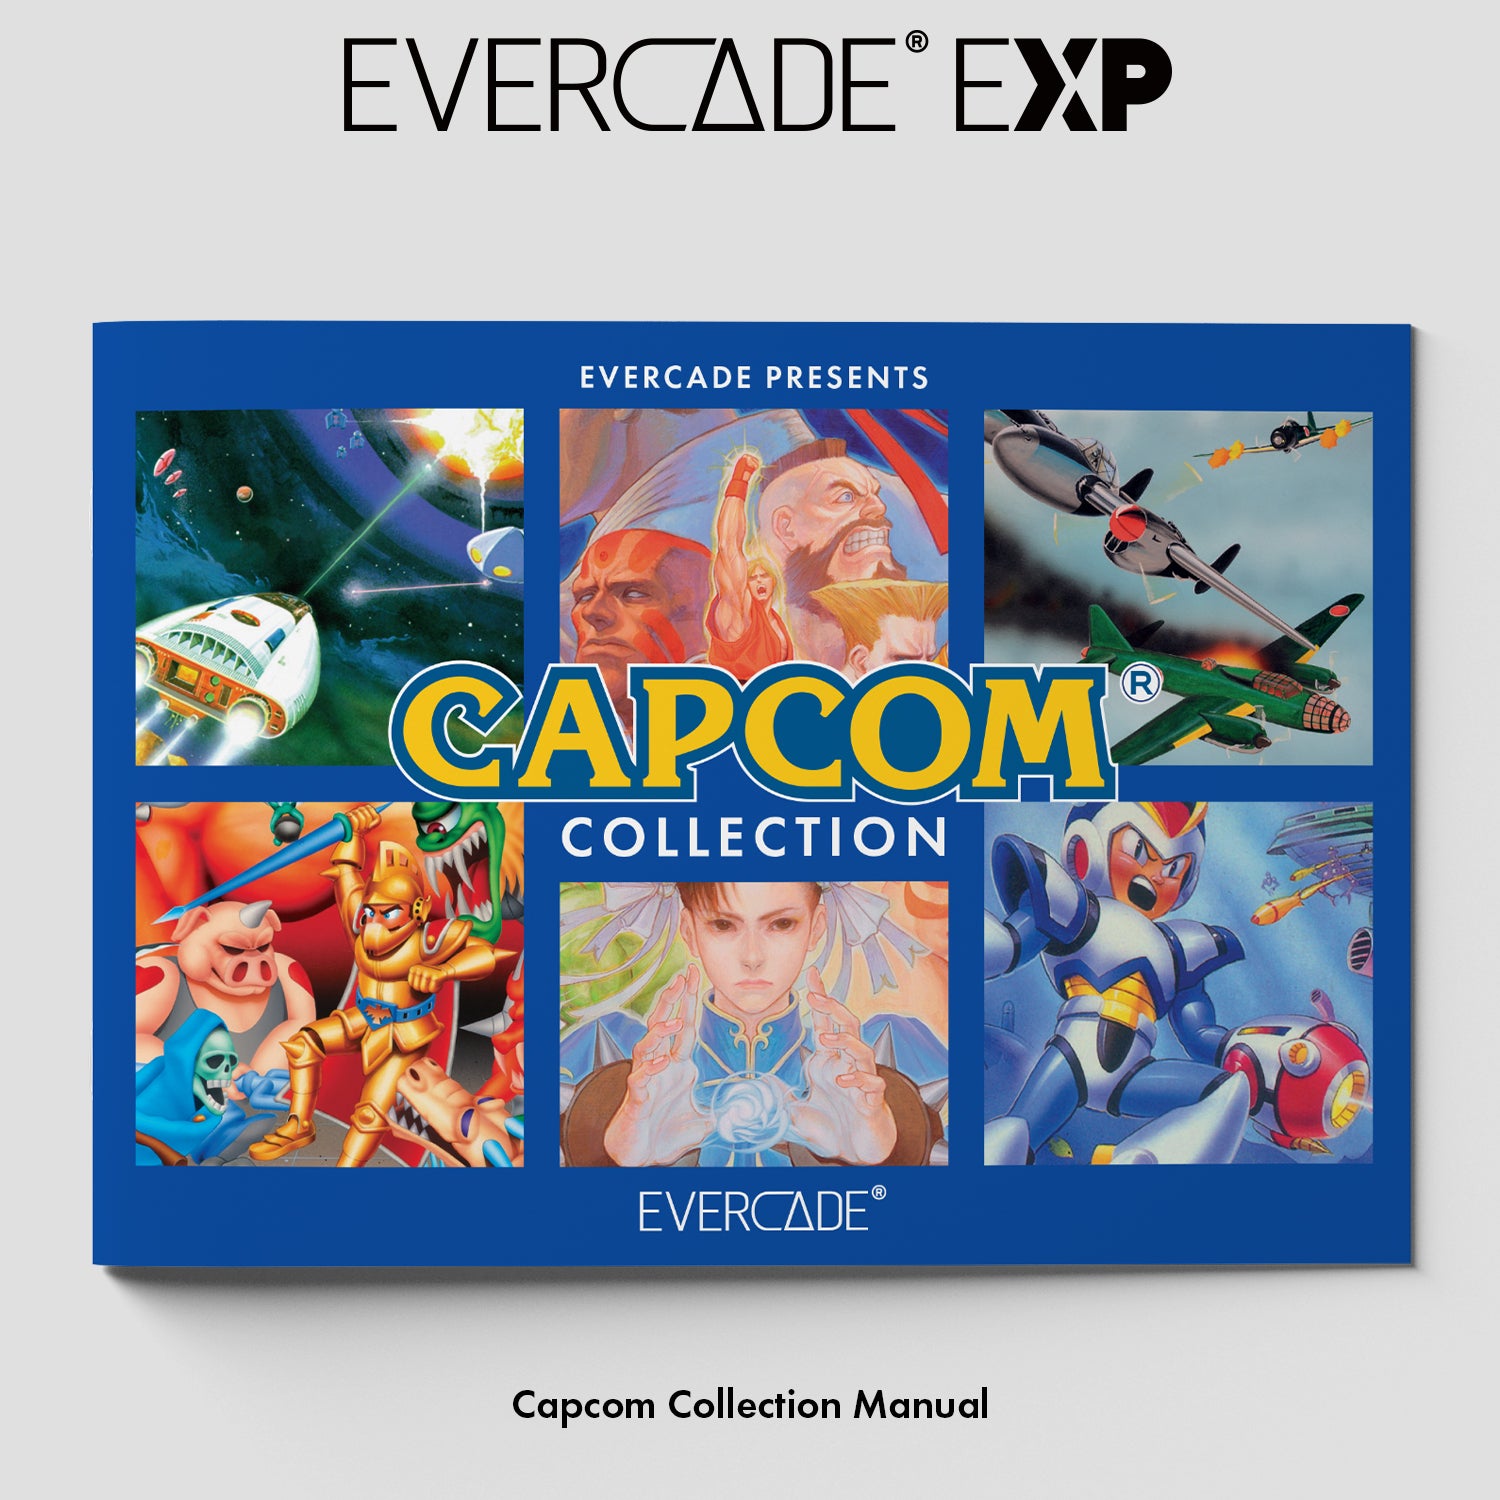 Evercade EXP White Edition with Exclusive Keyring